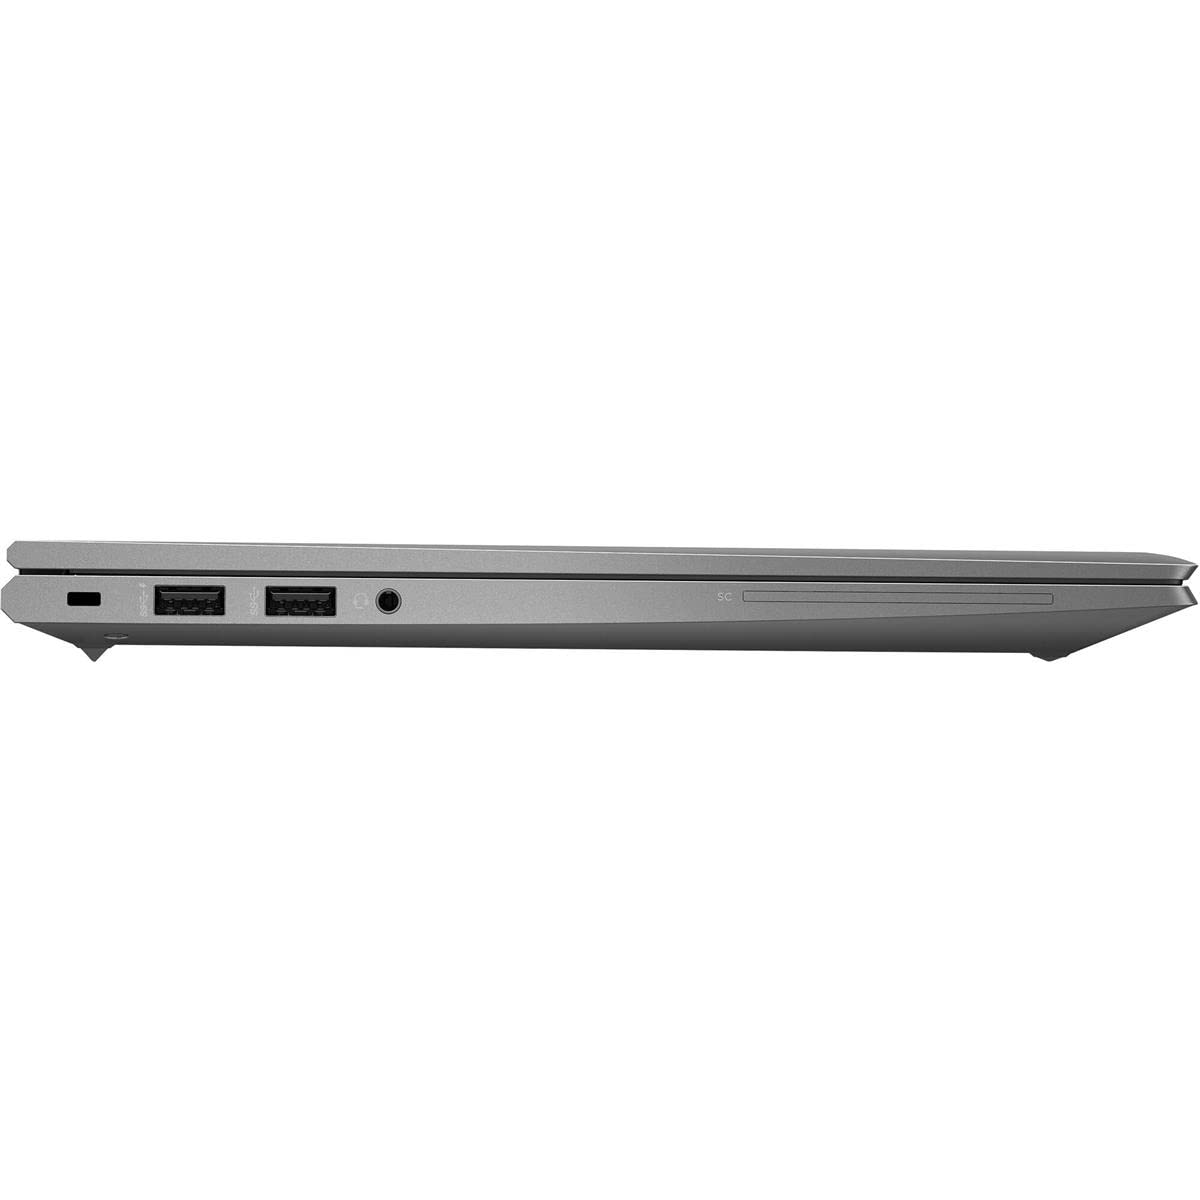 HP Smart Buy/Zbook/Firefly/14G8, INTELCOREI51135G7 (2.40GHZ, 8MB, 4CORES), 16GB32002D